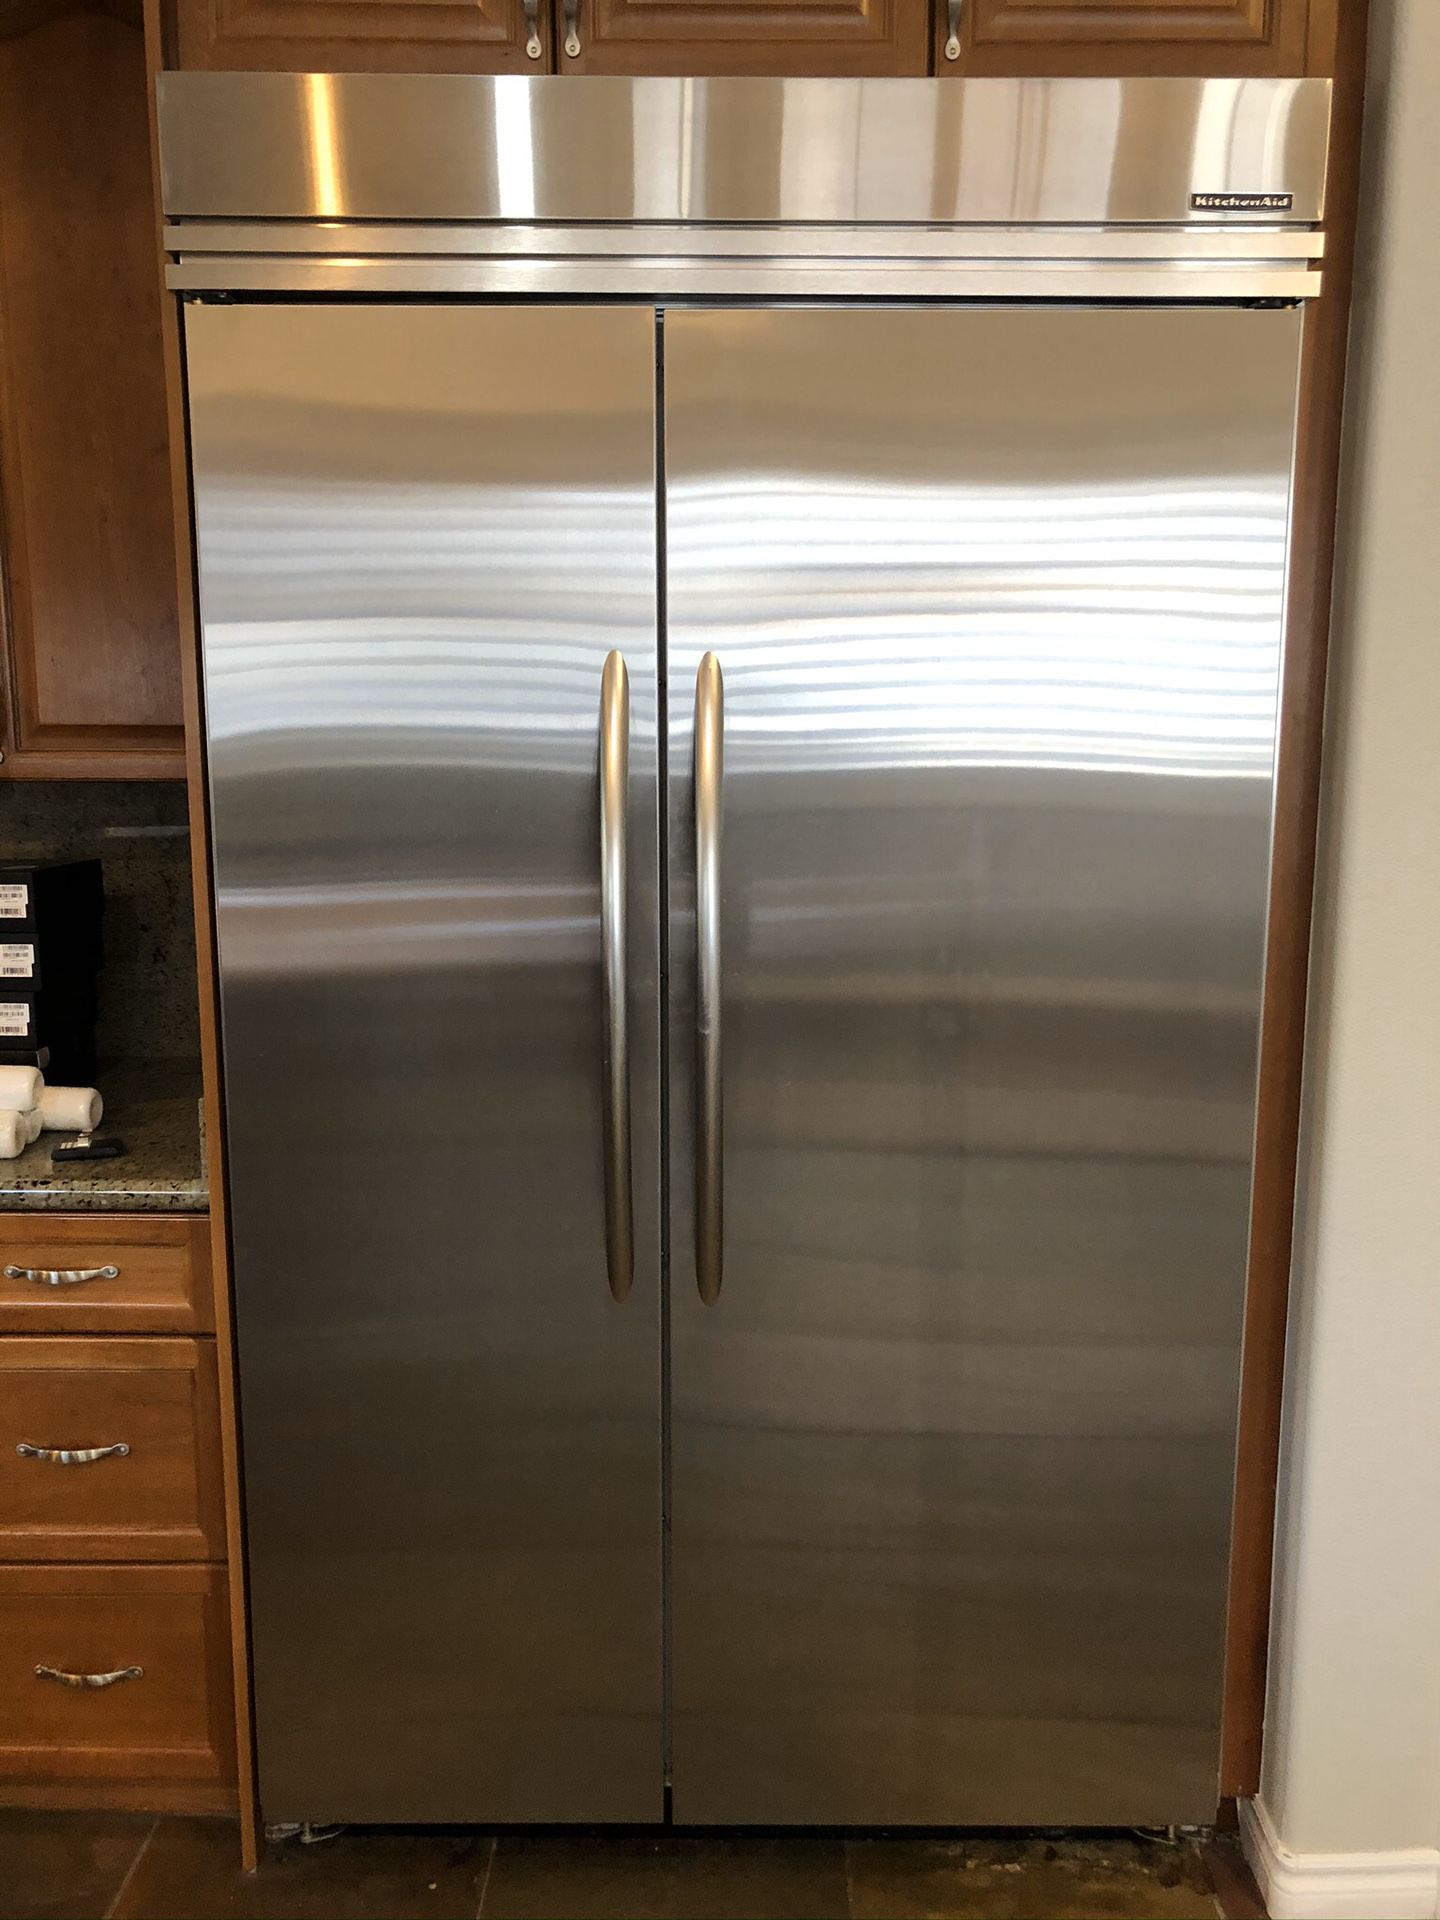 KitchenAid 48” Built-in Side-by-Side Refrigerator